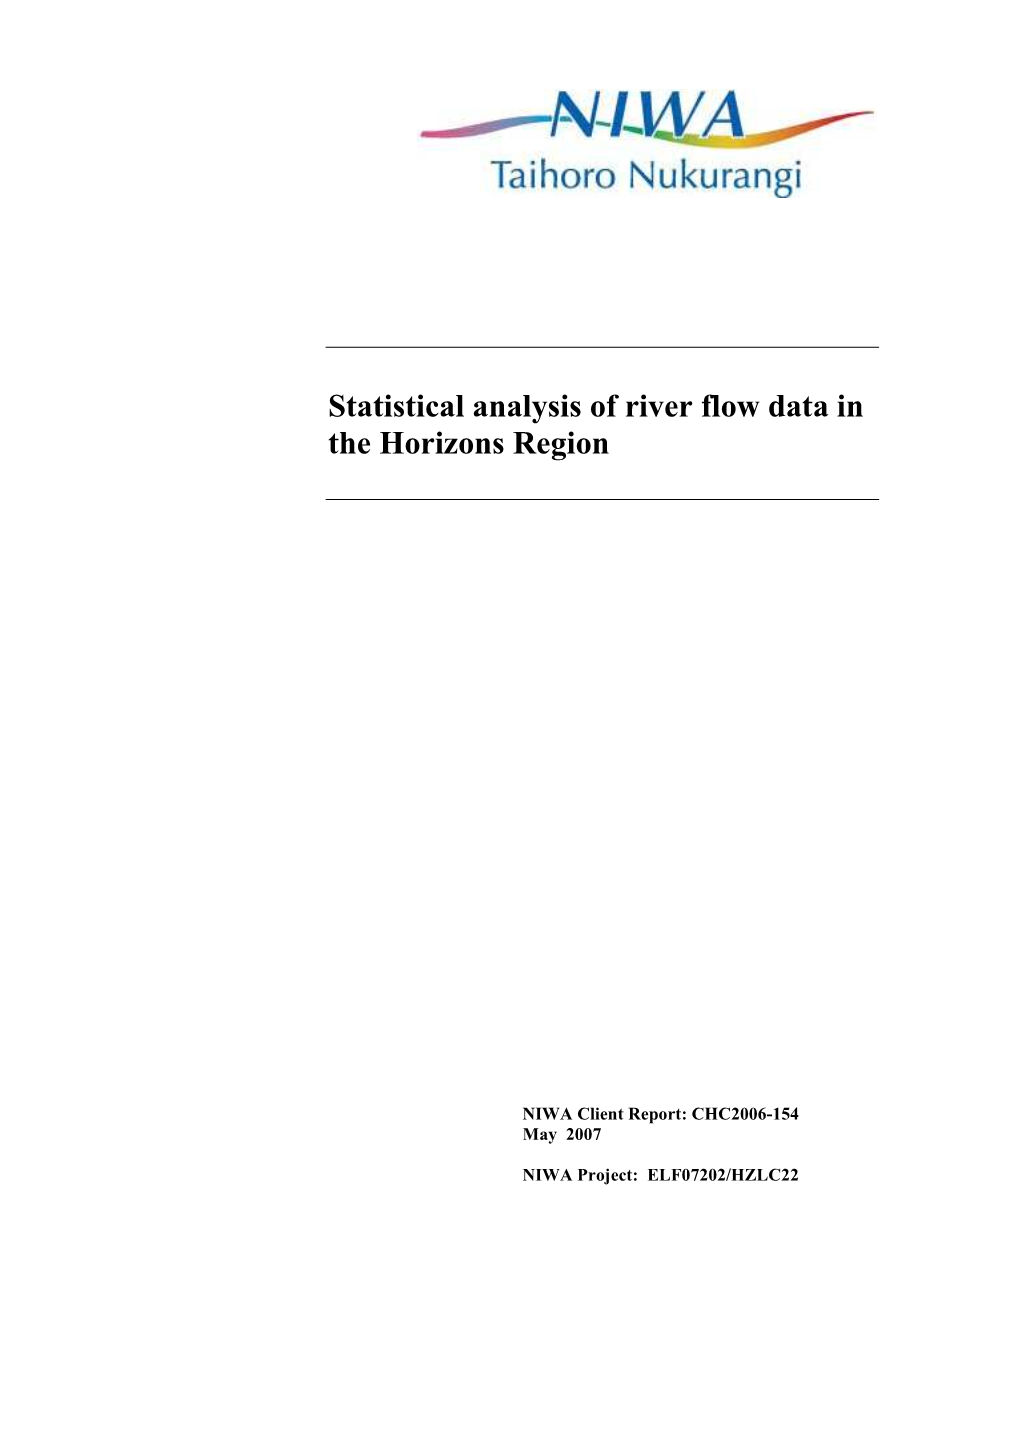 Statistical Analysis of River Flow Data in the Horizons Region